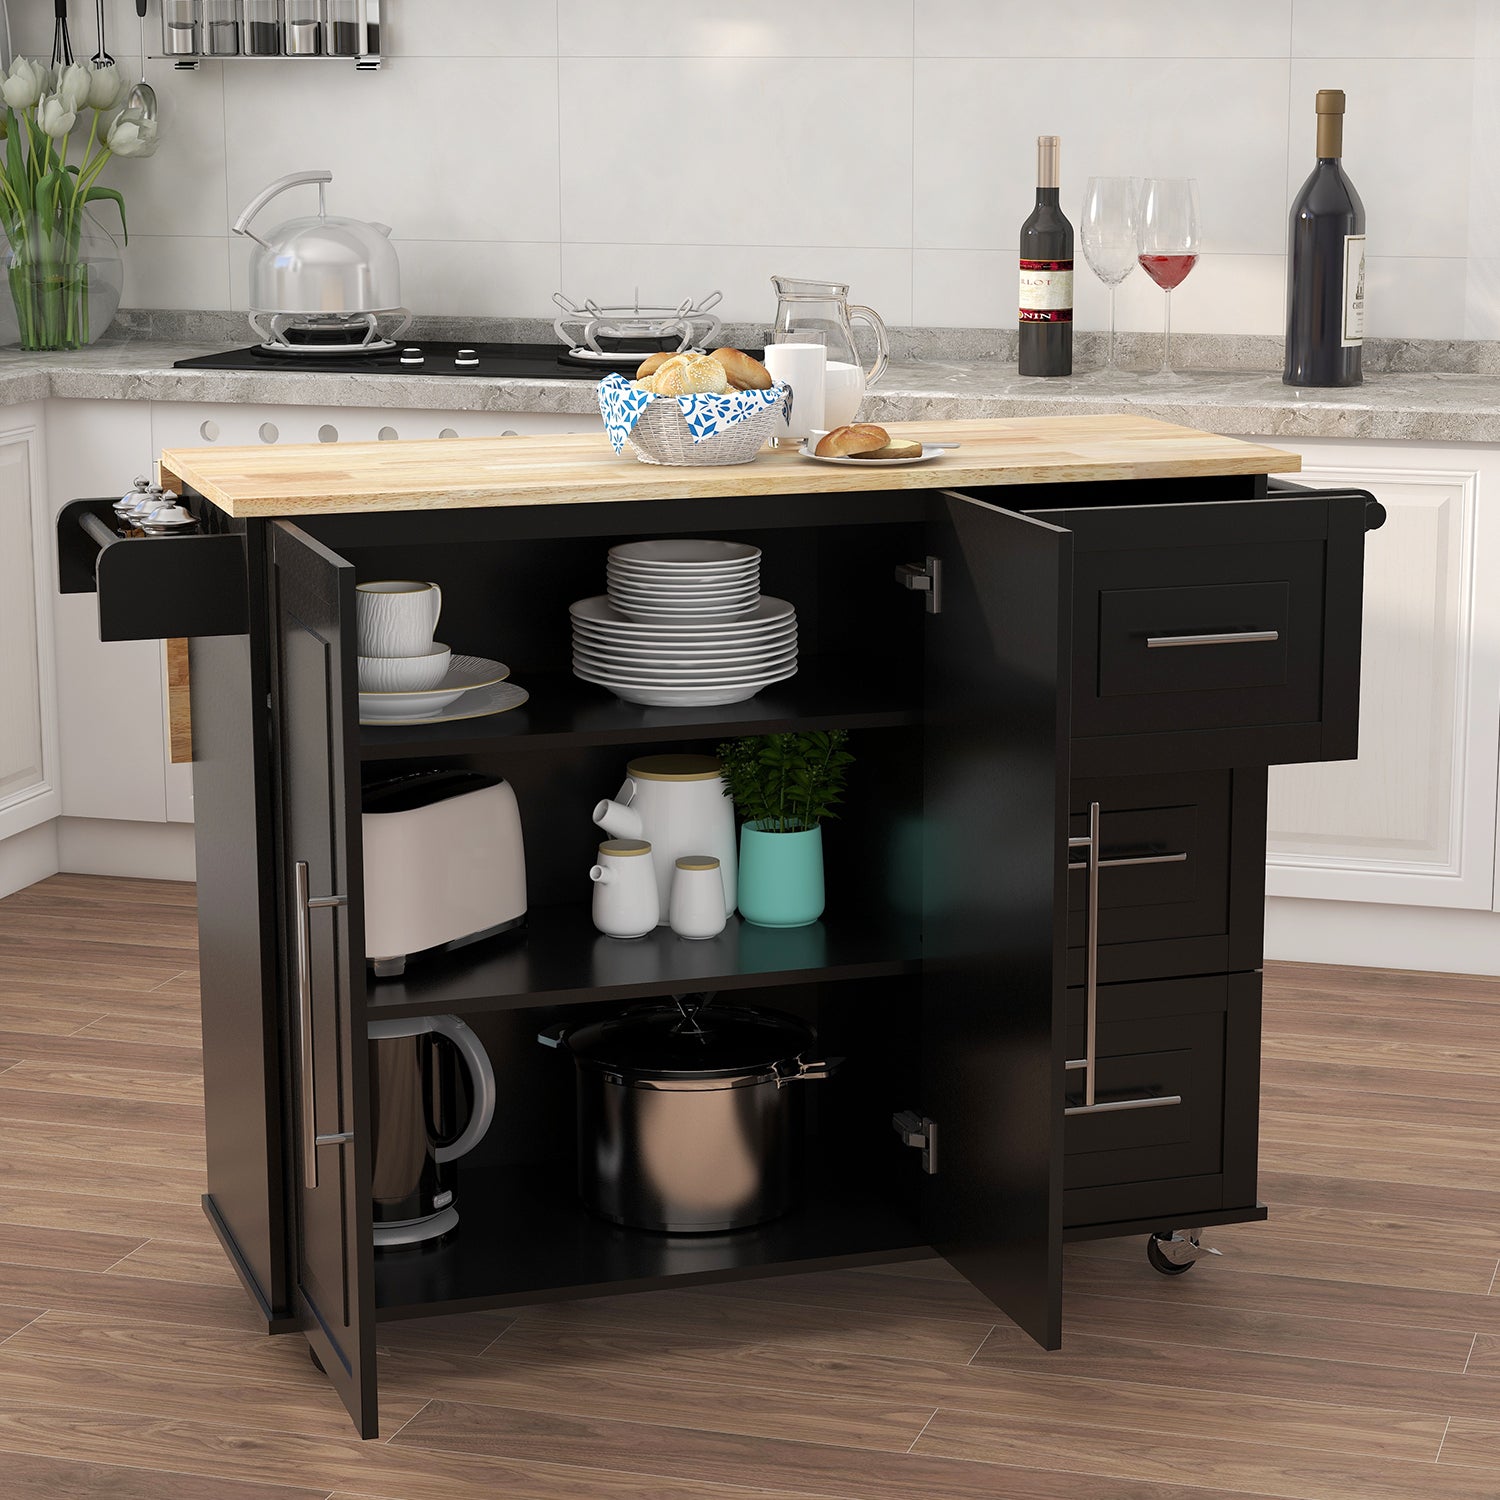 Kitchen Island with Spice Rack, Towel Rack & Extensible Solid Wood Table Top (Black)